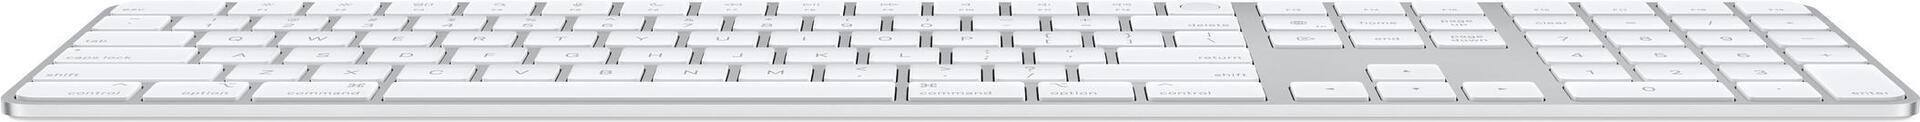 Apple Magic Keyboard with Touch ID and Numeric Keypad (MK2C3F/A)